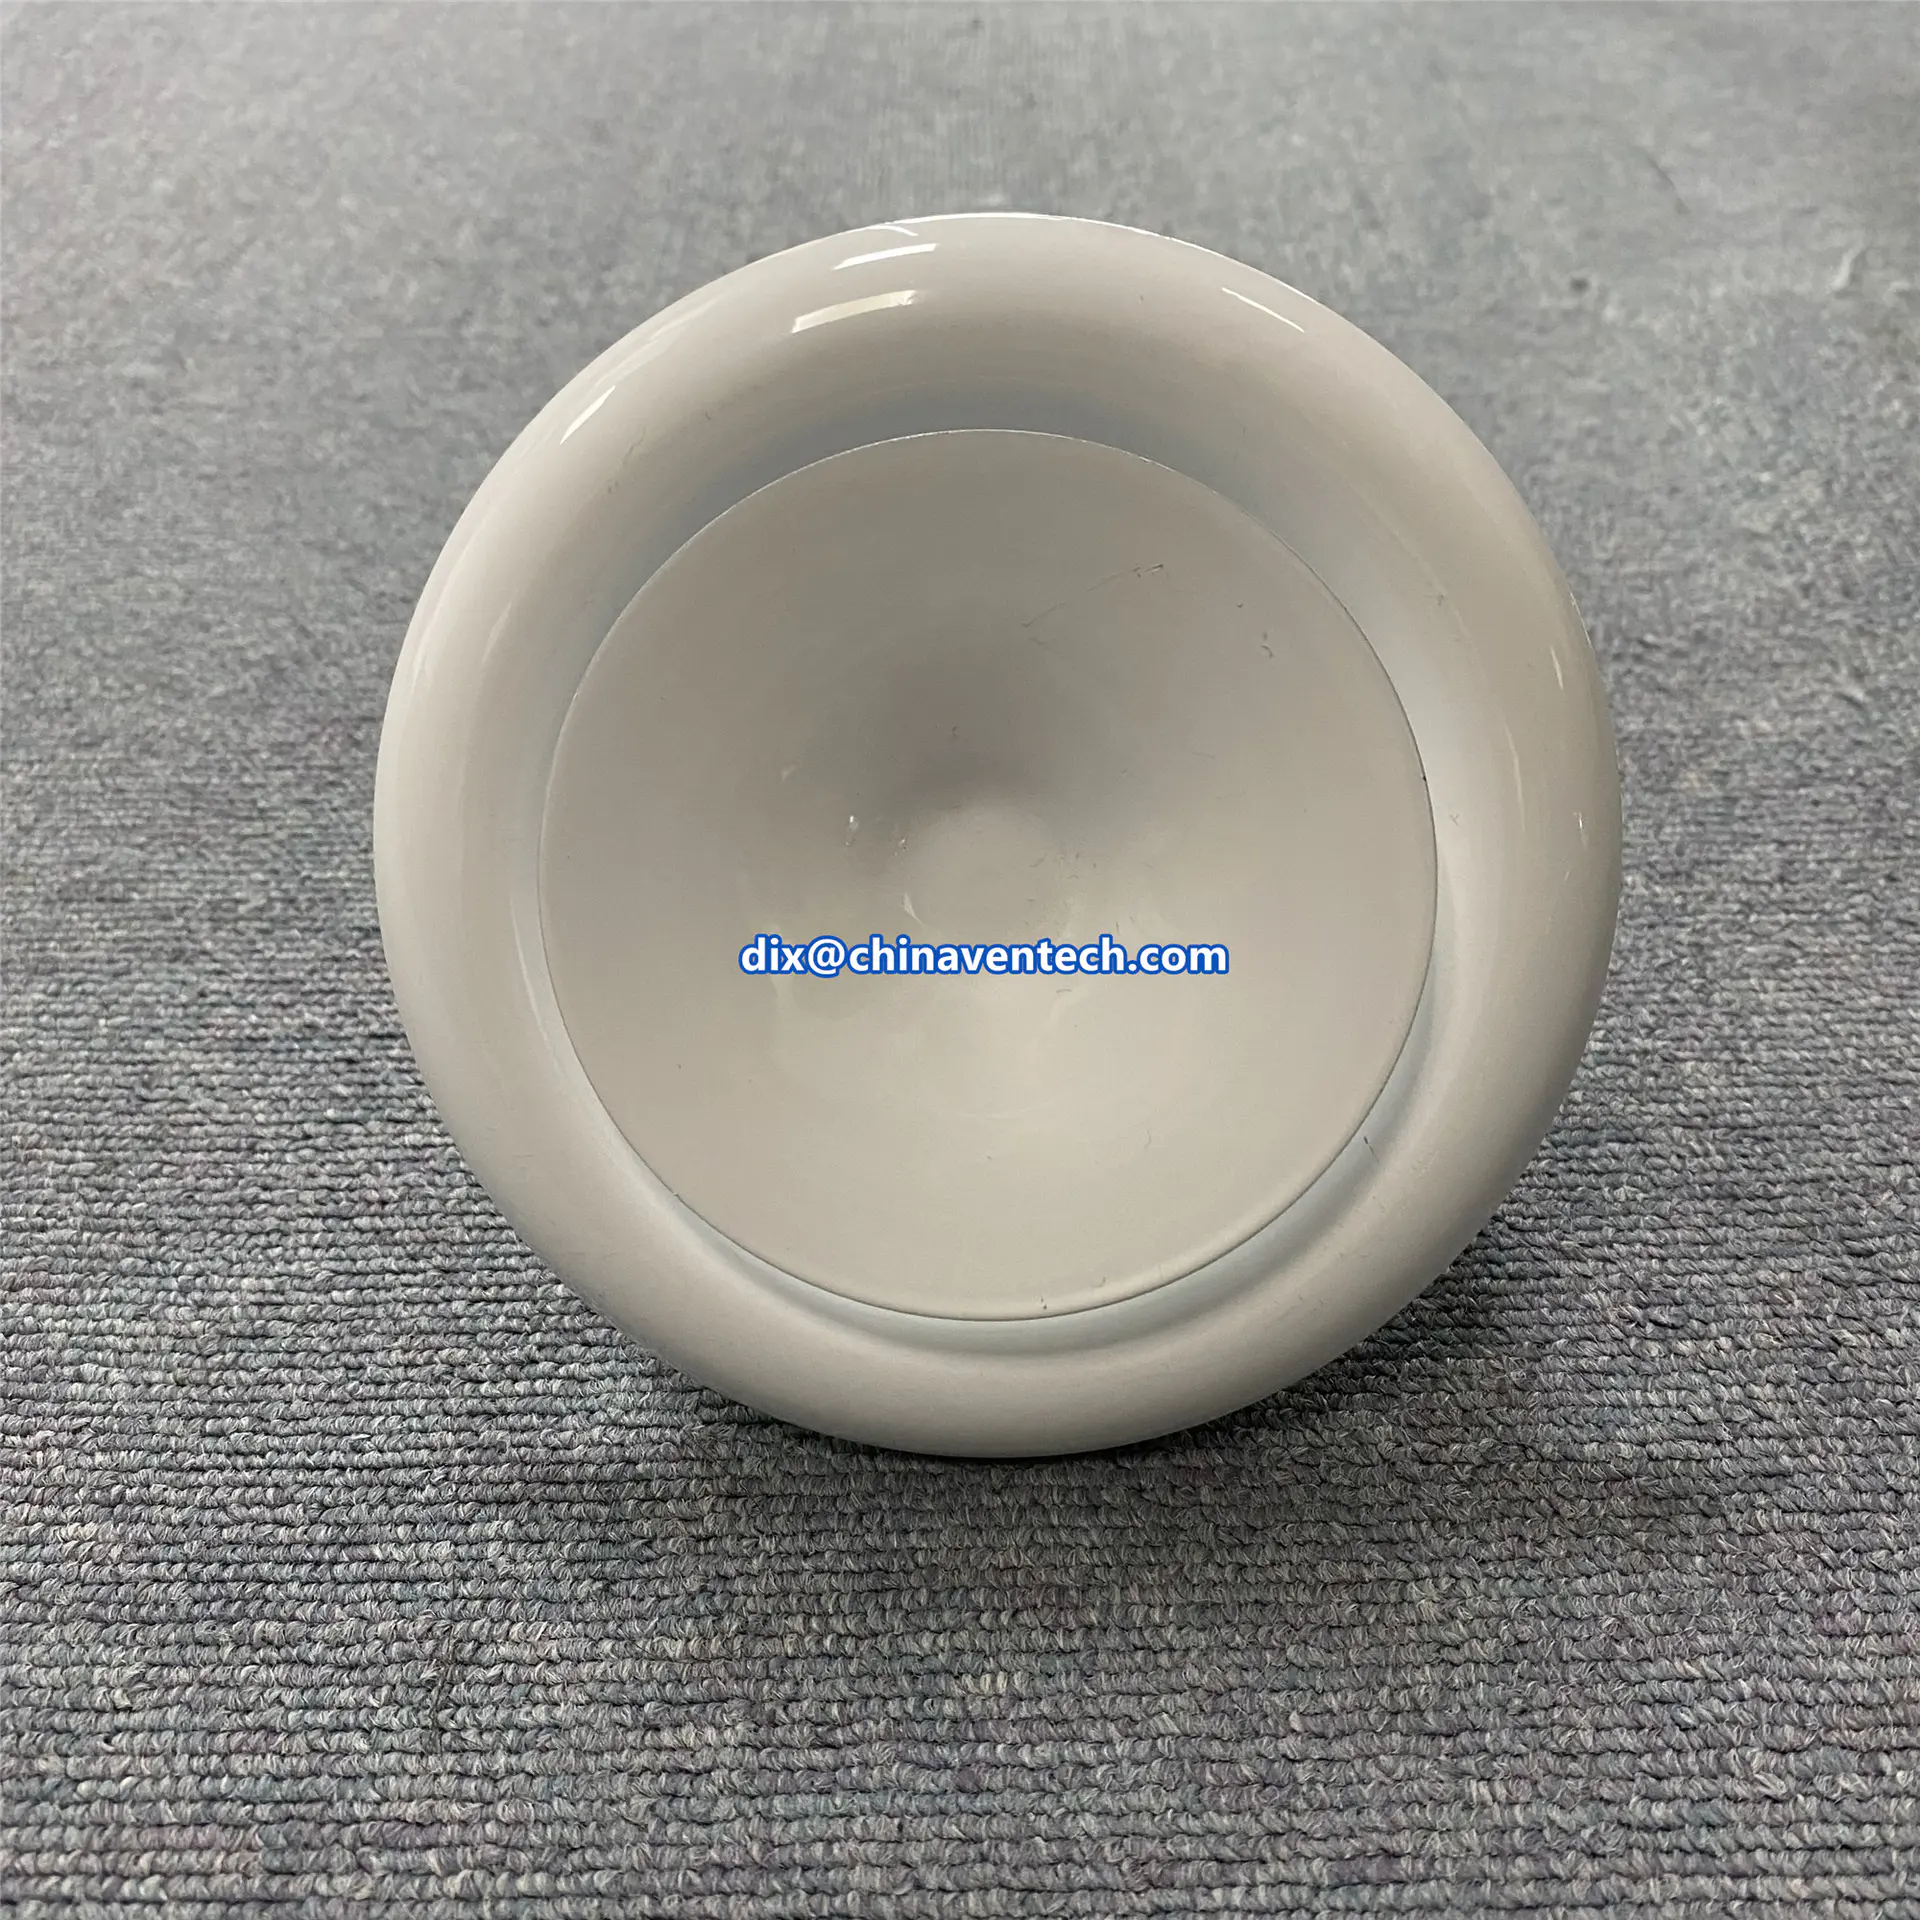 Hvac ceiling ducts ventilation supply air vent round disc valve diffusers